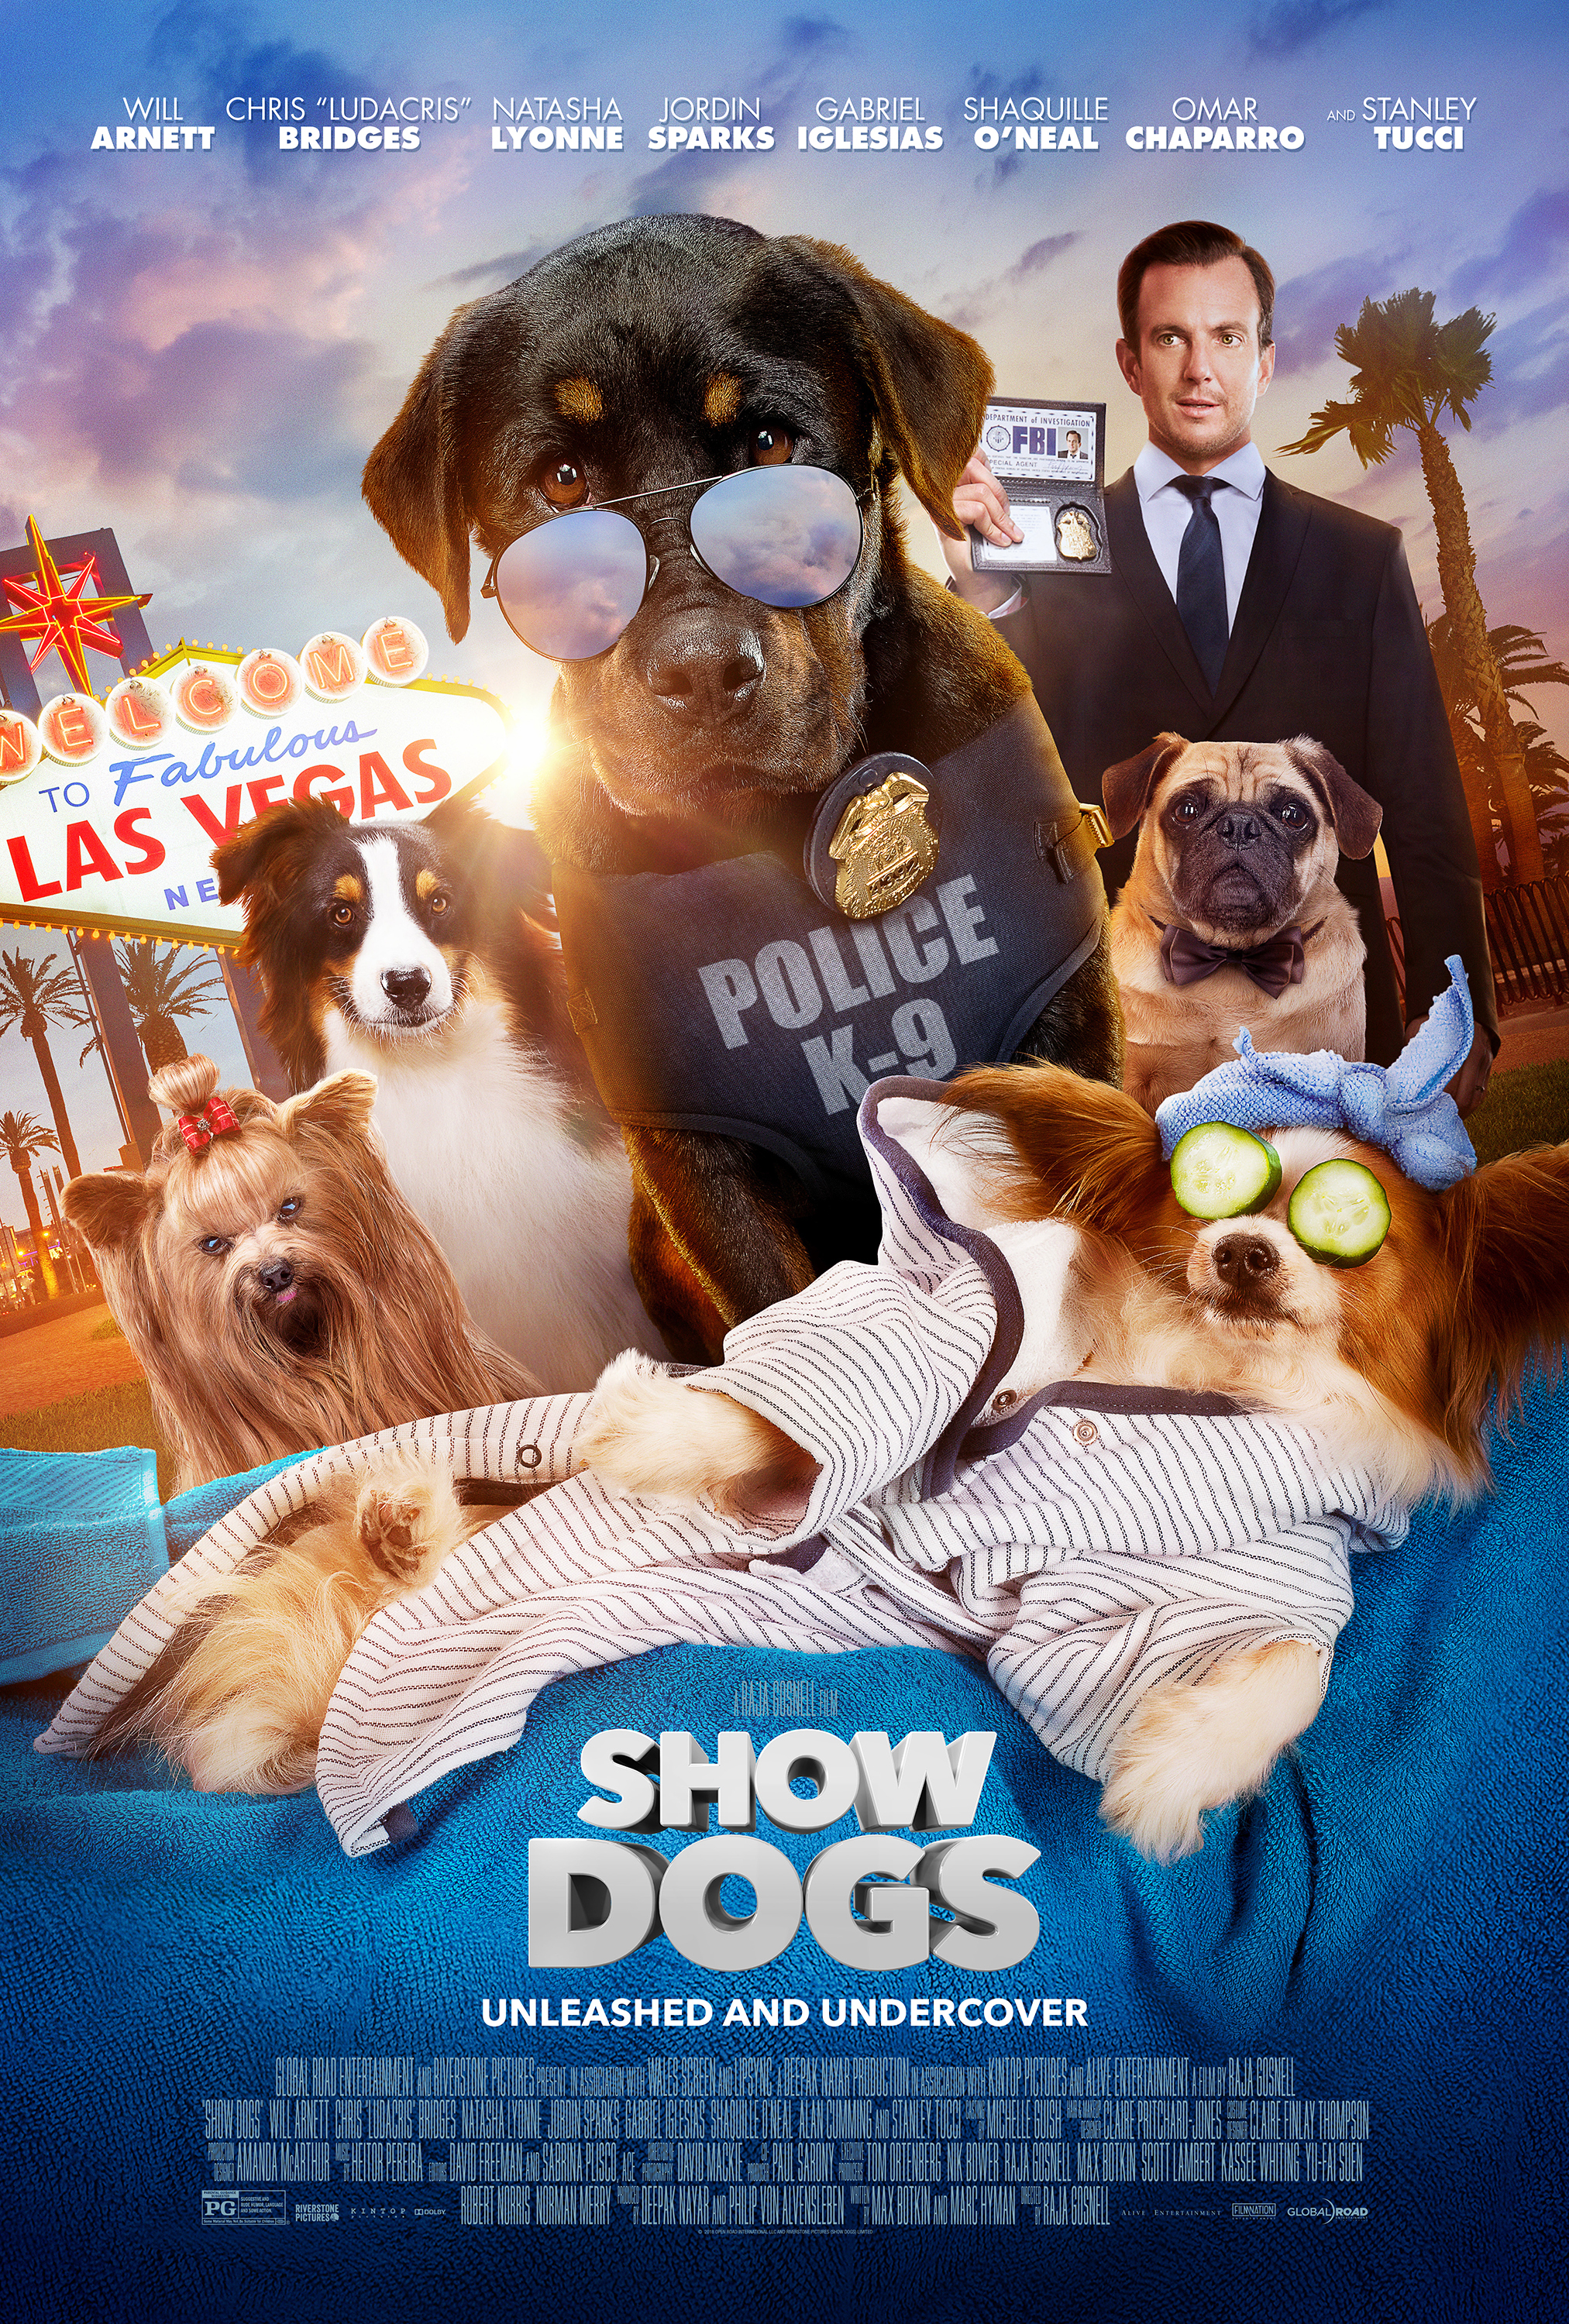 Show Dogs Trailer It's Miss Congeniality with Talking Dogs